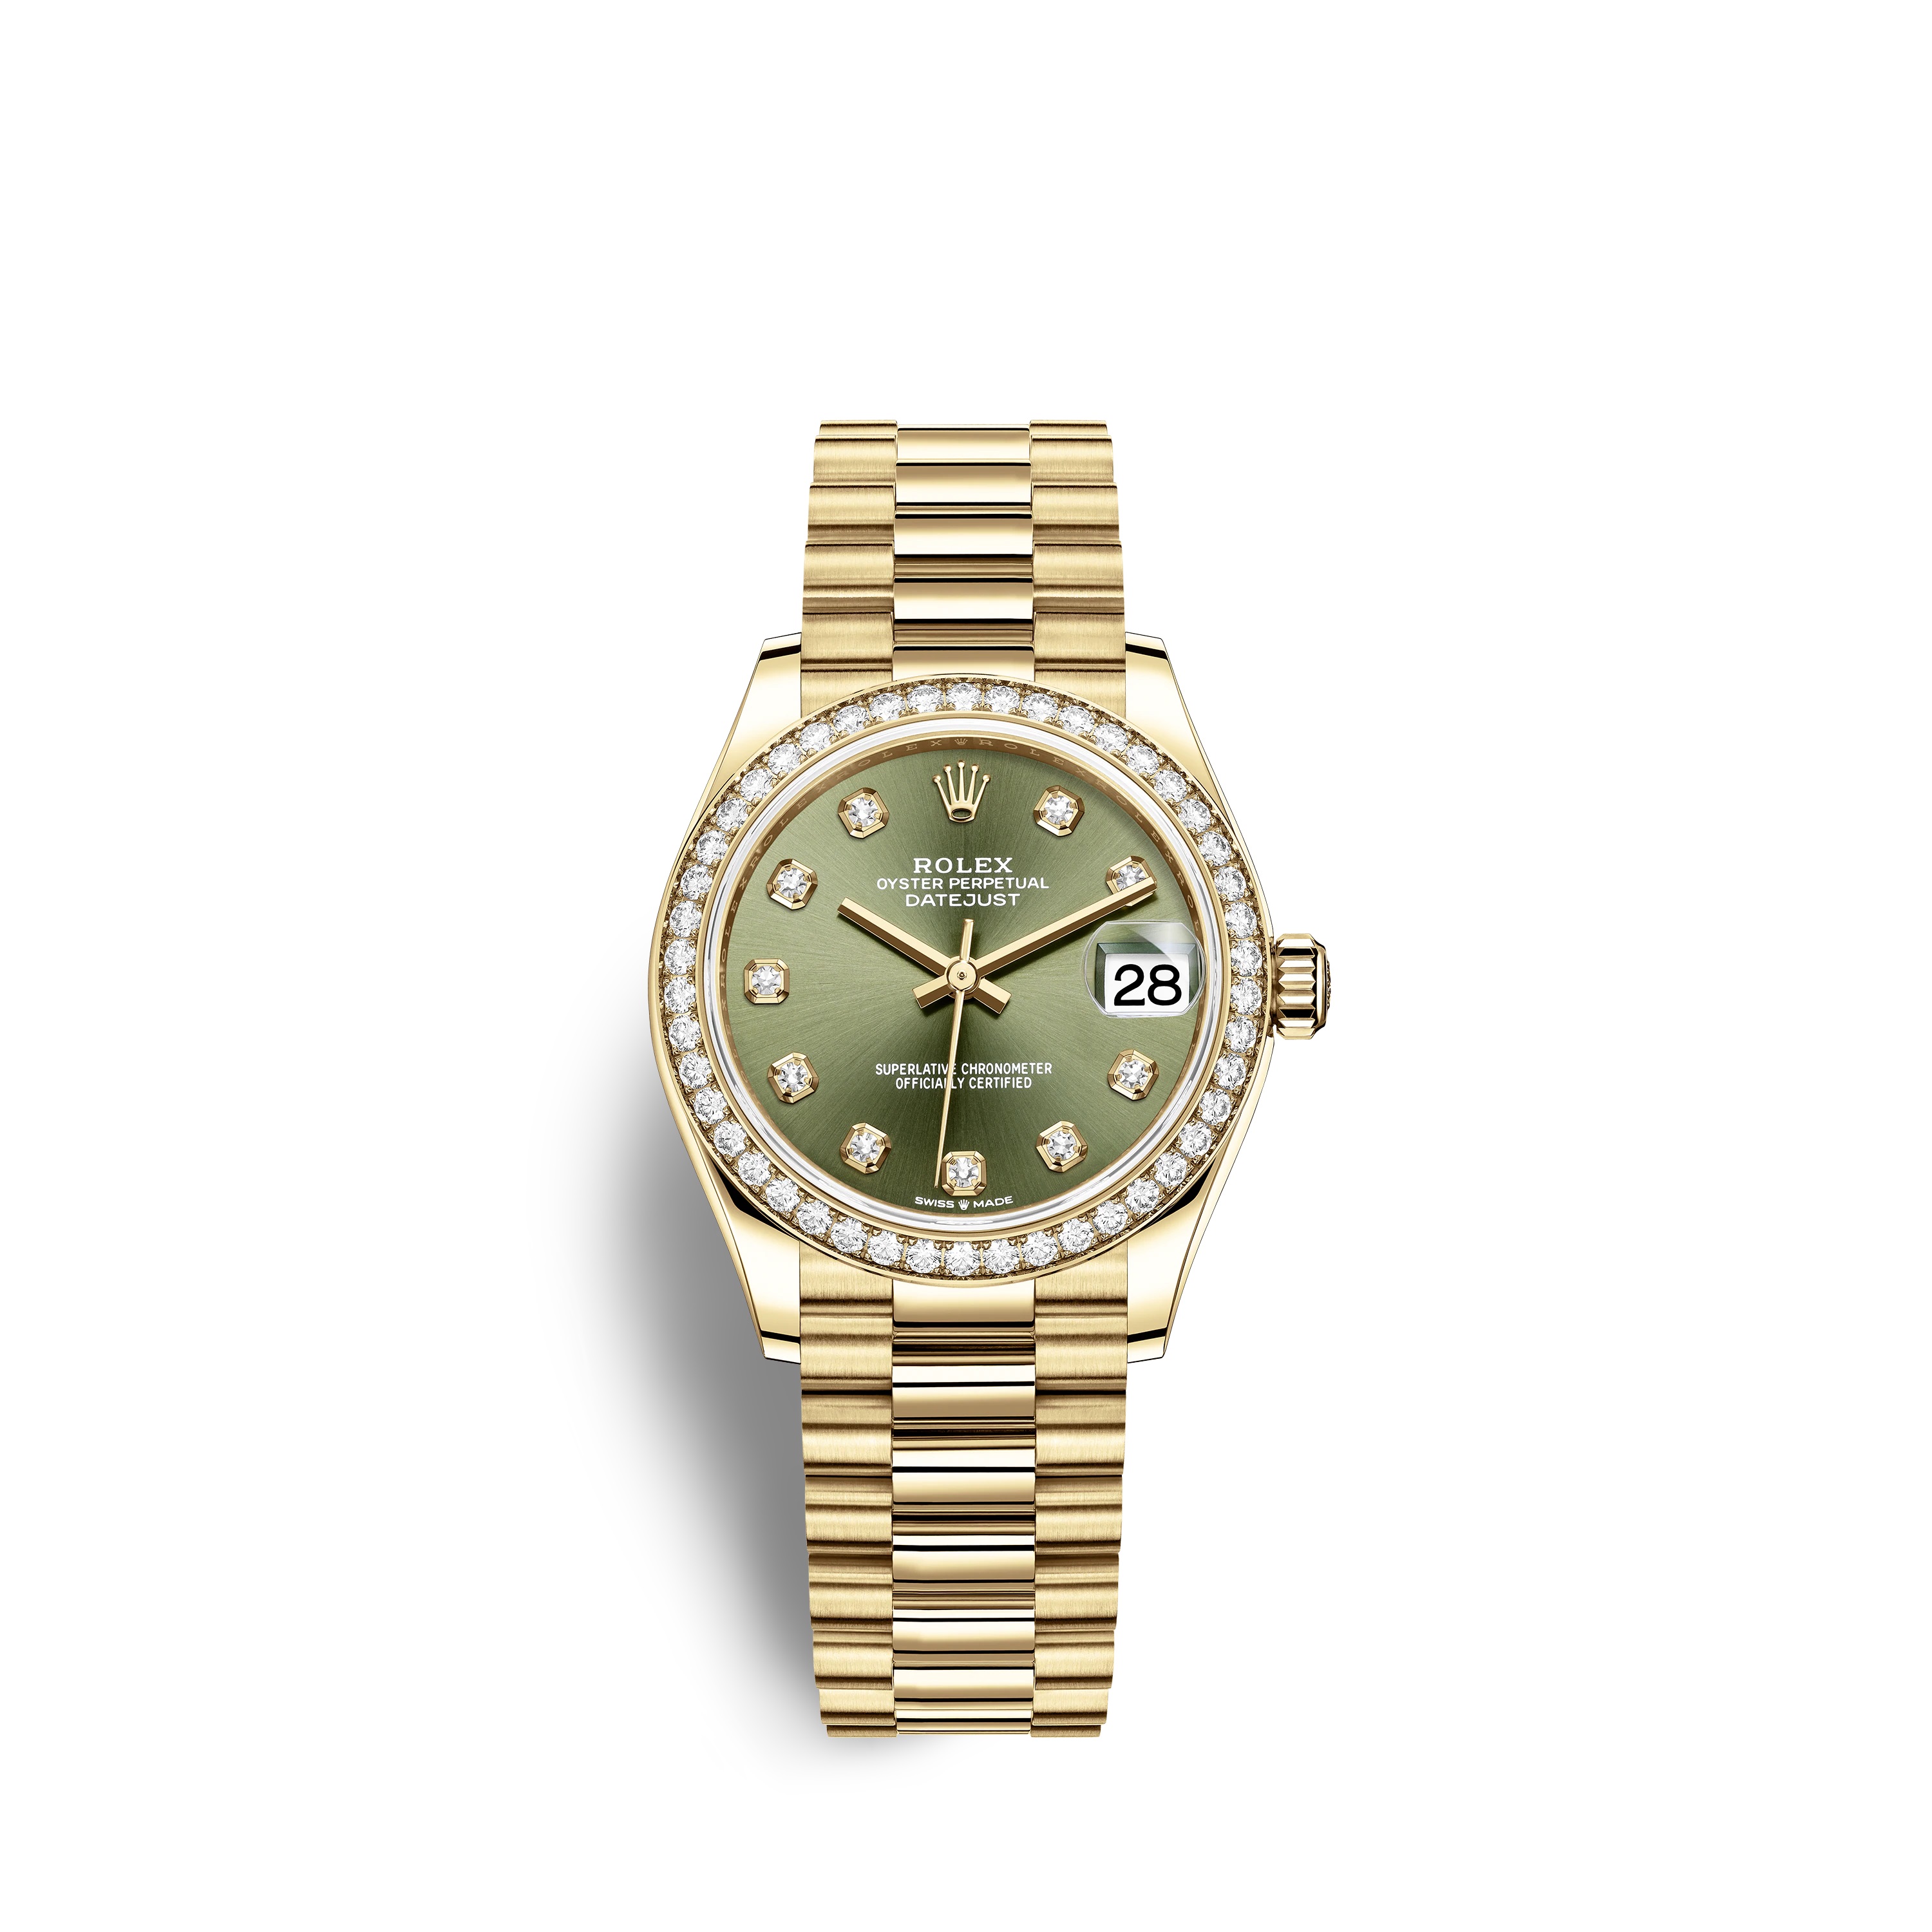 Datejust 31 278288RBR Gold Watch (Olive Green Set with Diamonds)